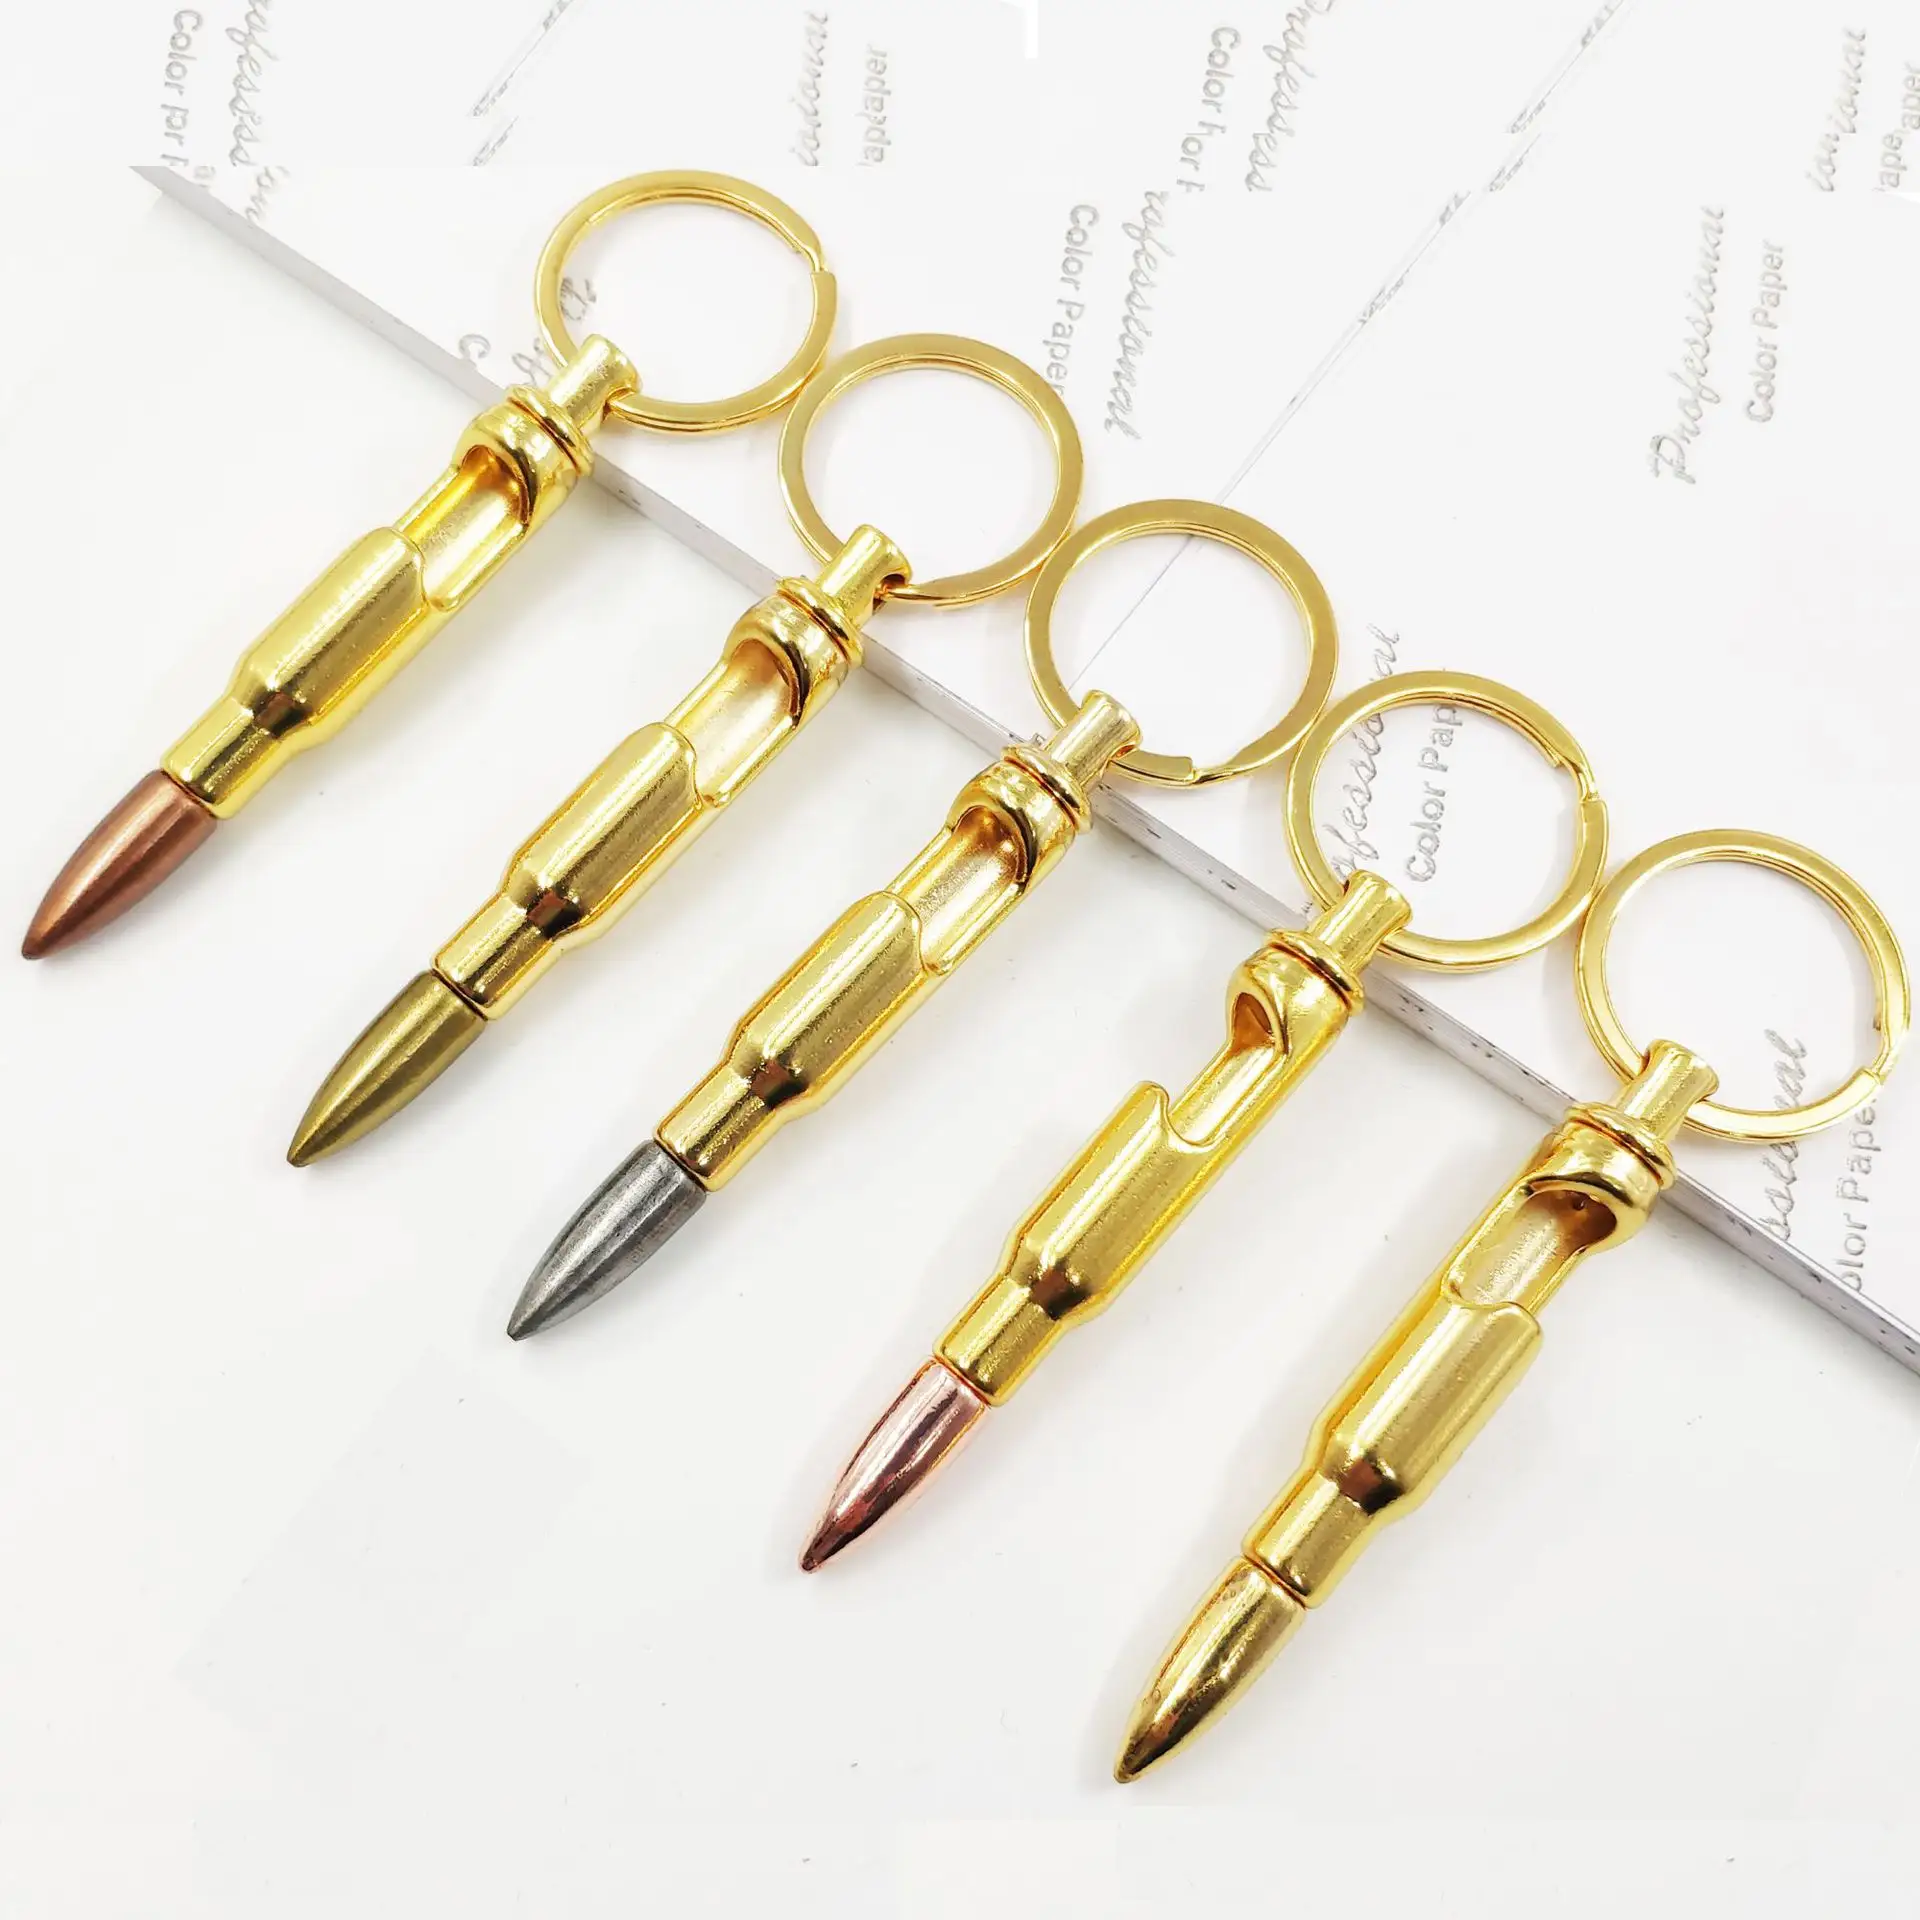 Multifunctional practical promotional gift bullet prototype personalized with pendant bullet beer bottle opener key chain